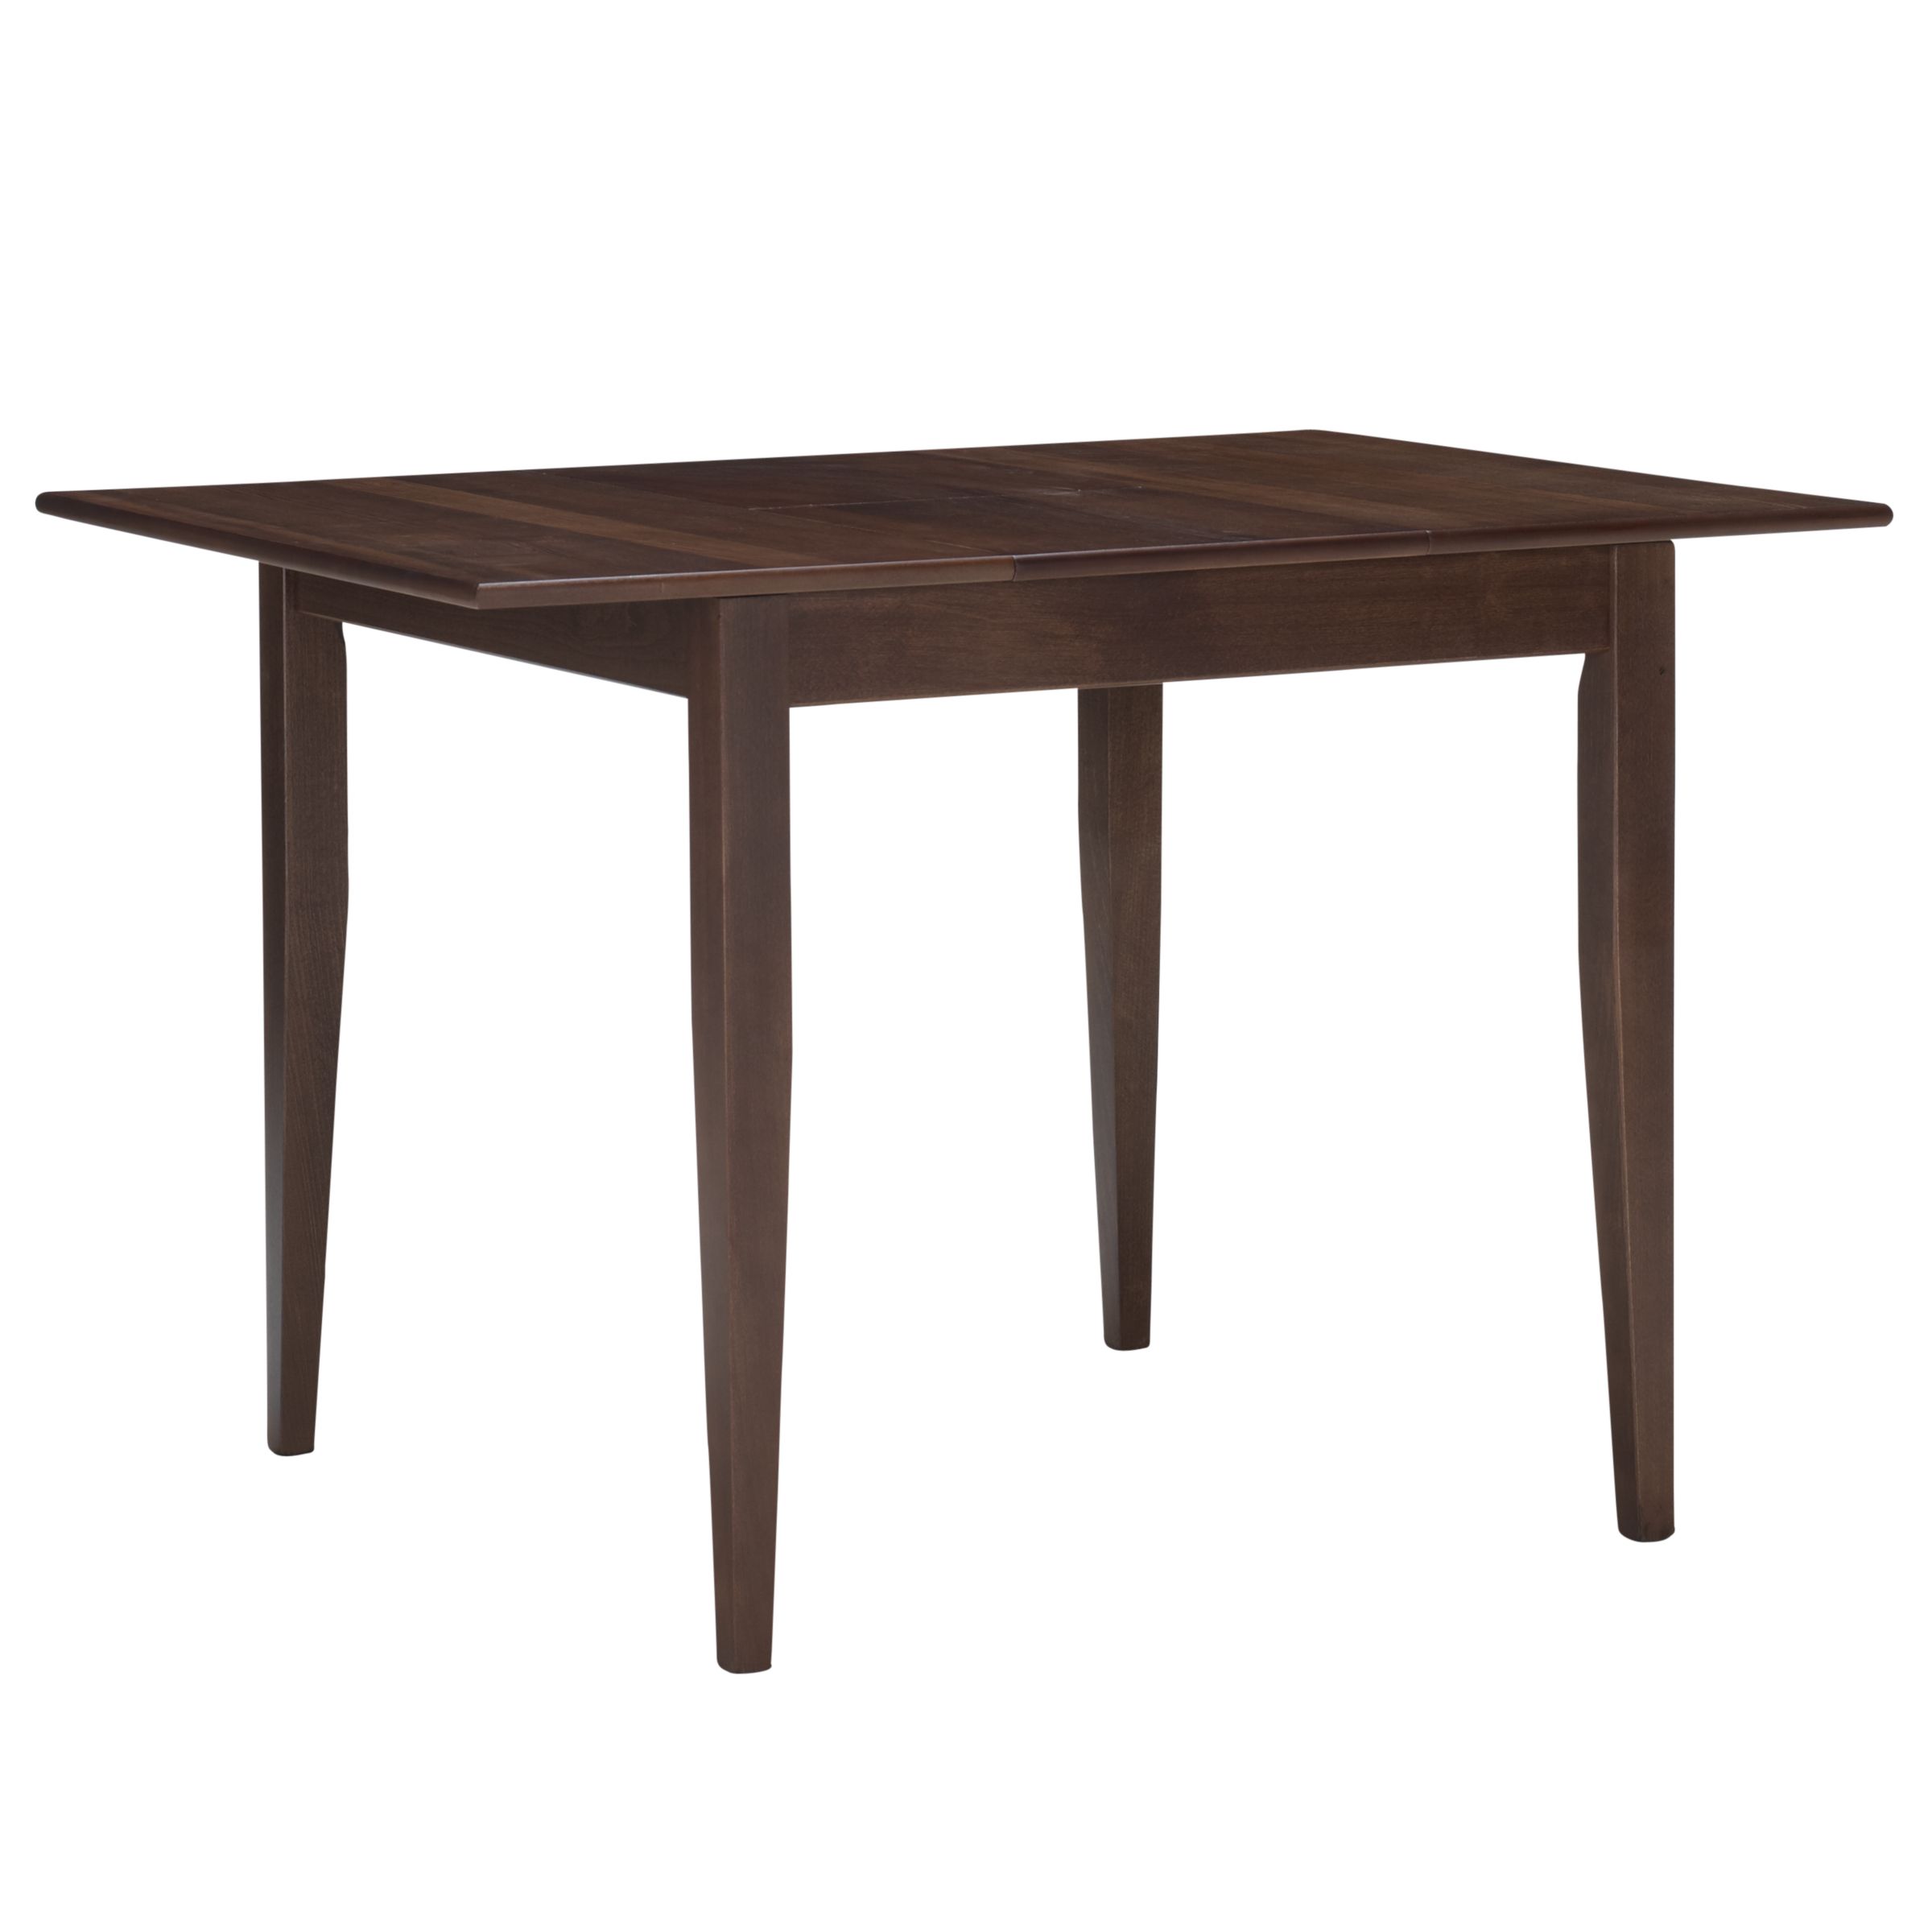 John Lewis Lacock Square Extending Dining Table,